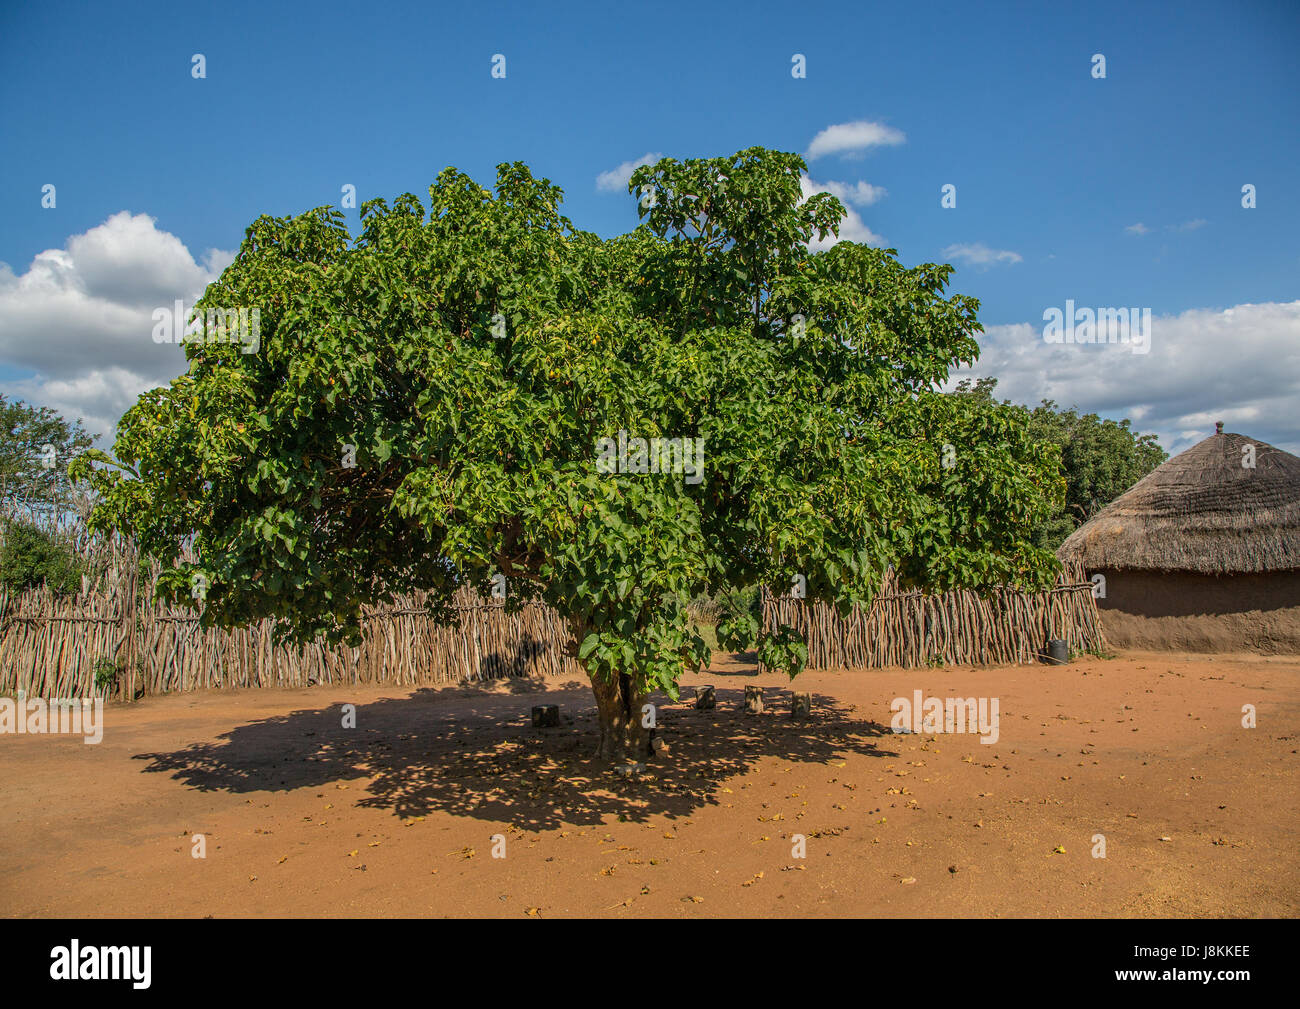 Landscape in an old village, Swaziland Stock Photo